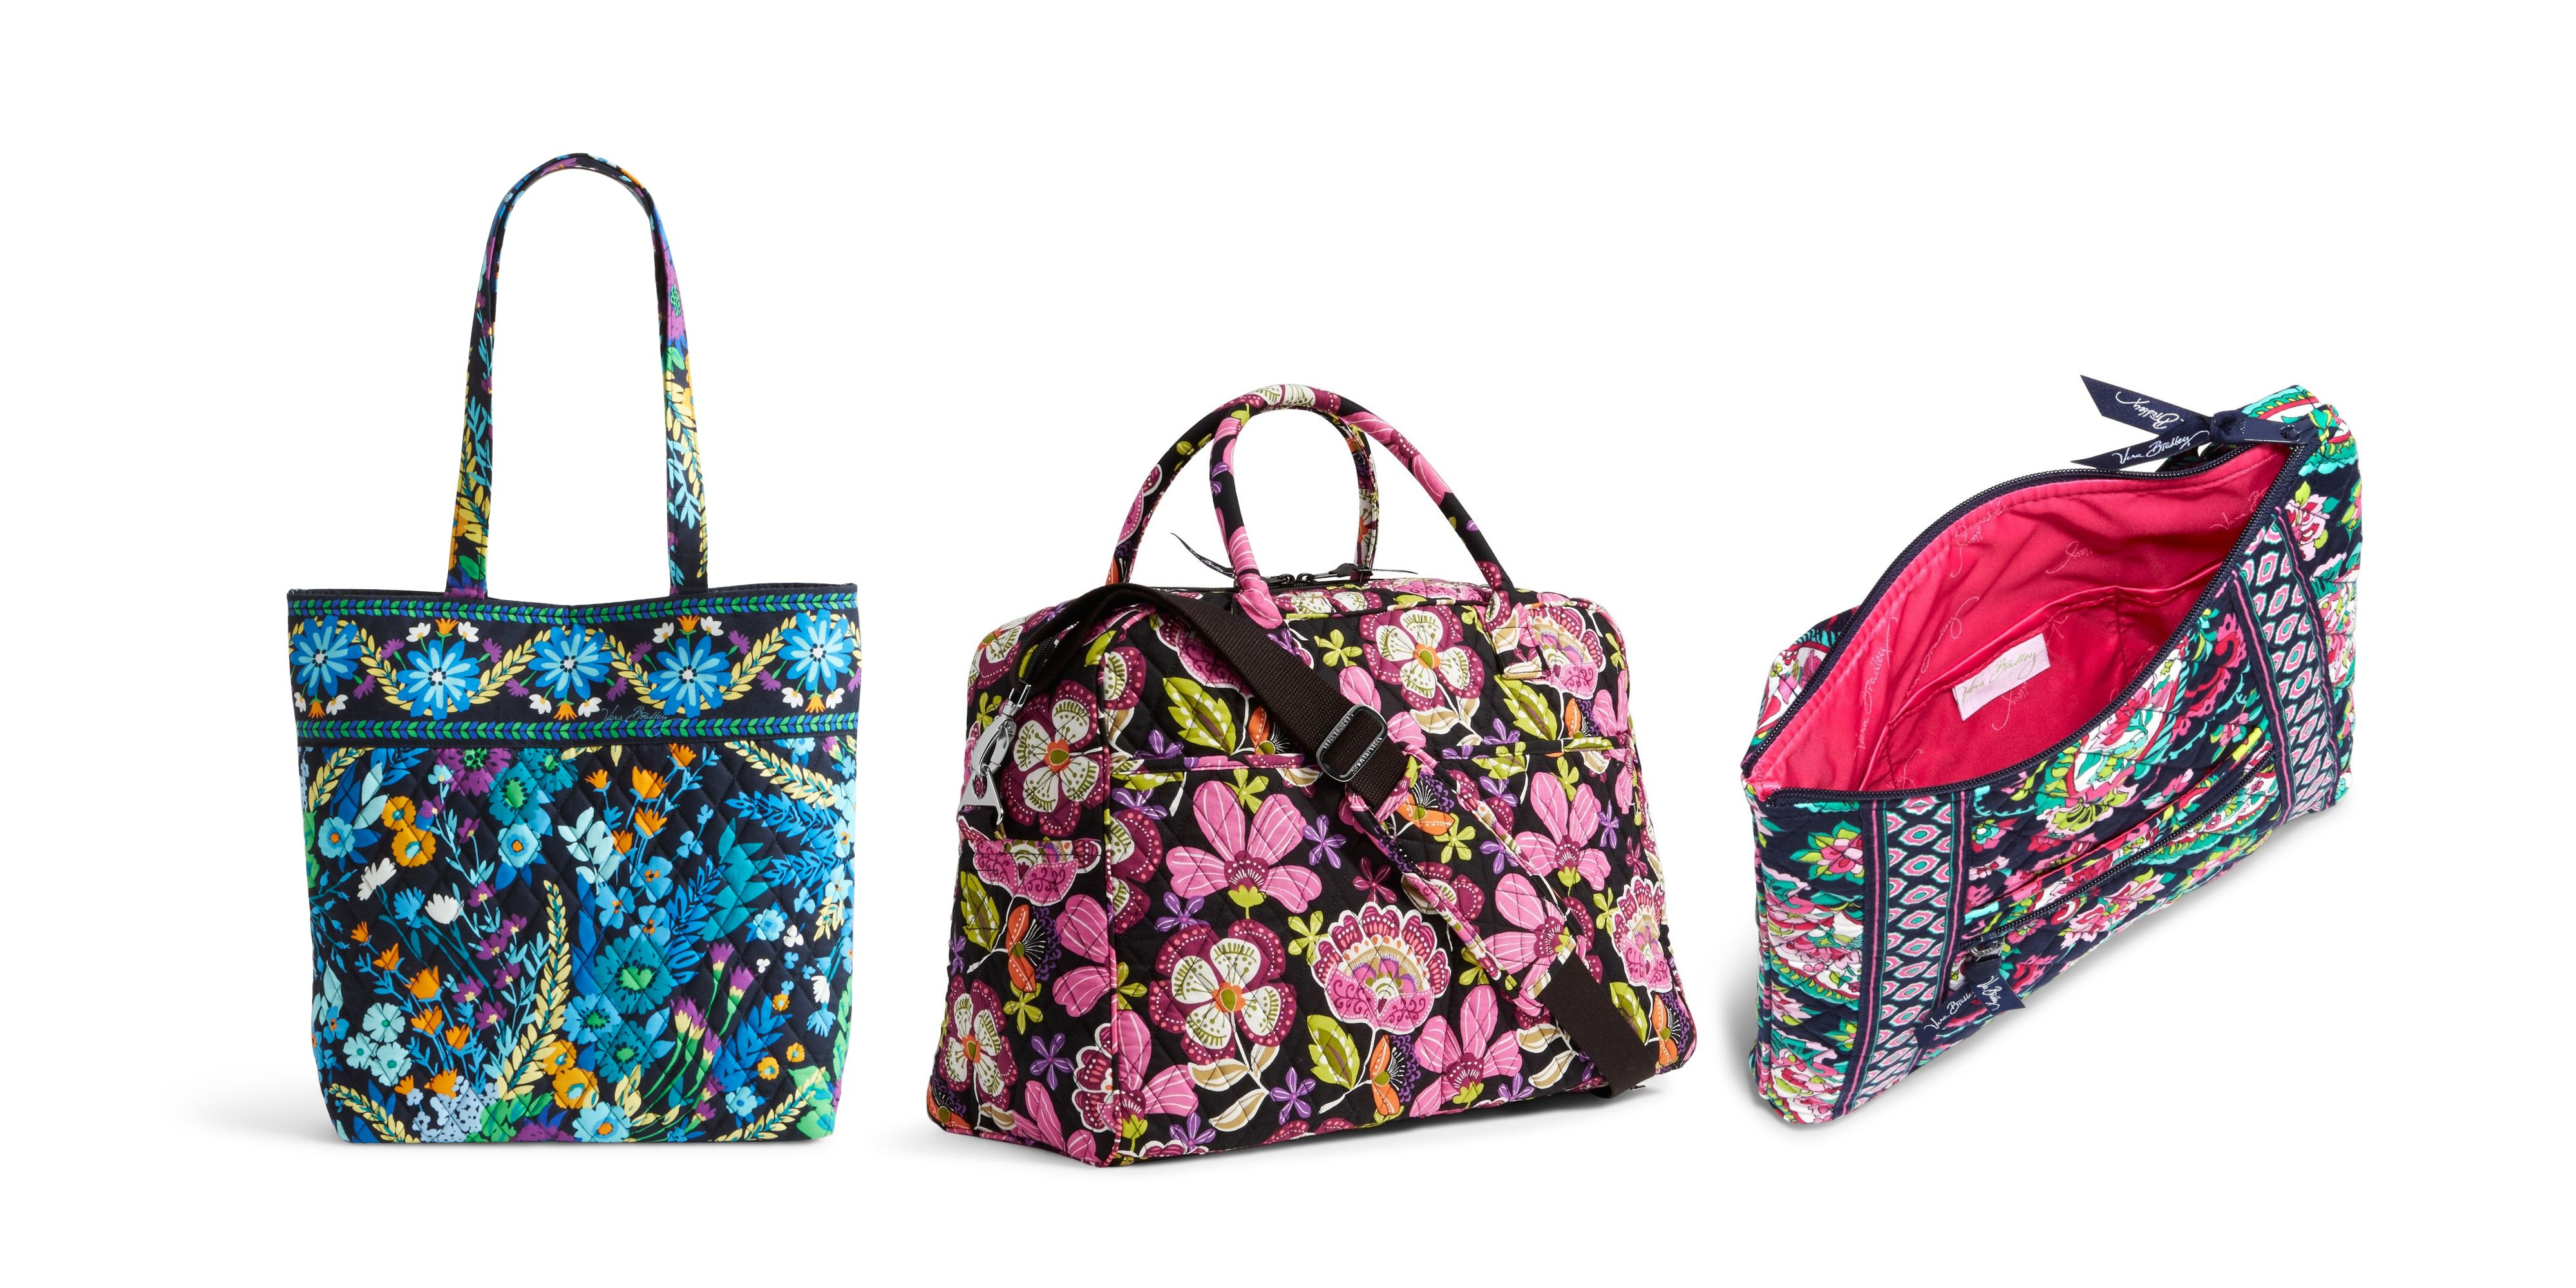 Vera Bradley Factory Exclusive Tote Bag ONLY $21.99, Baby Bag Only $39.99 and MORE!!